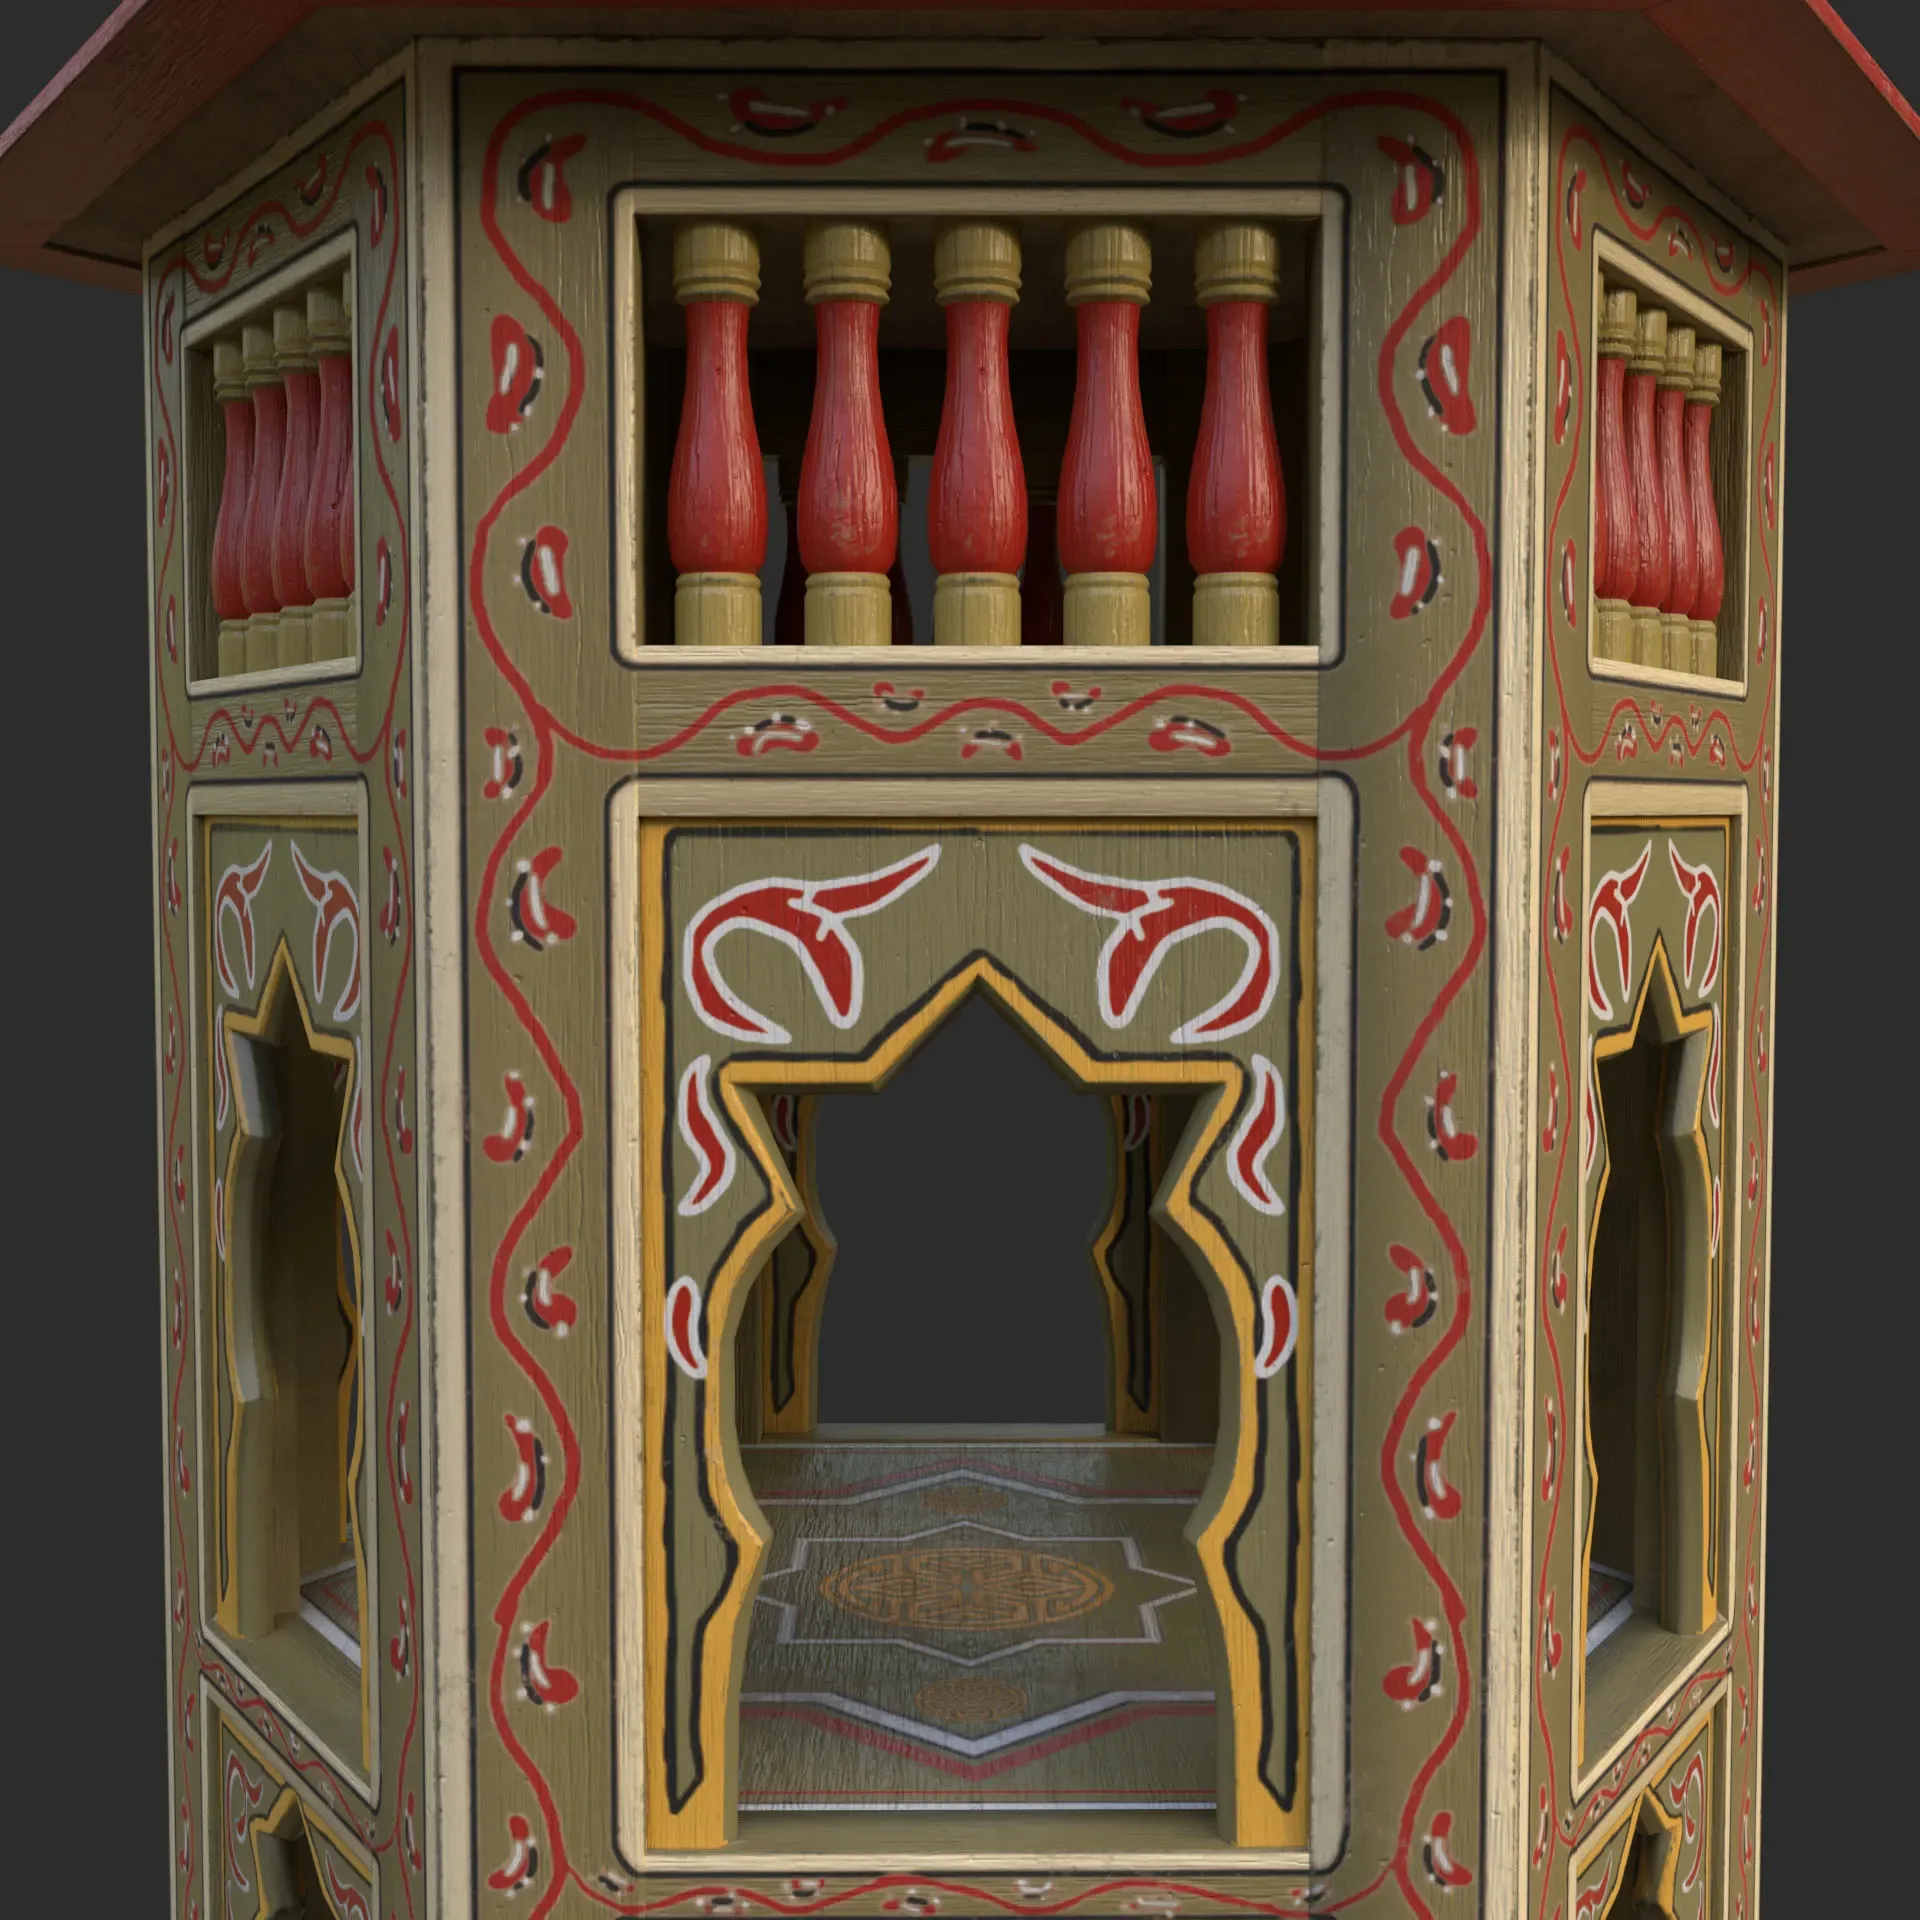 Painted Table Arabic (Game assets)